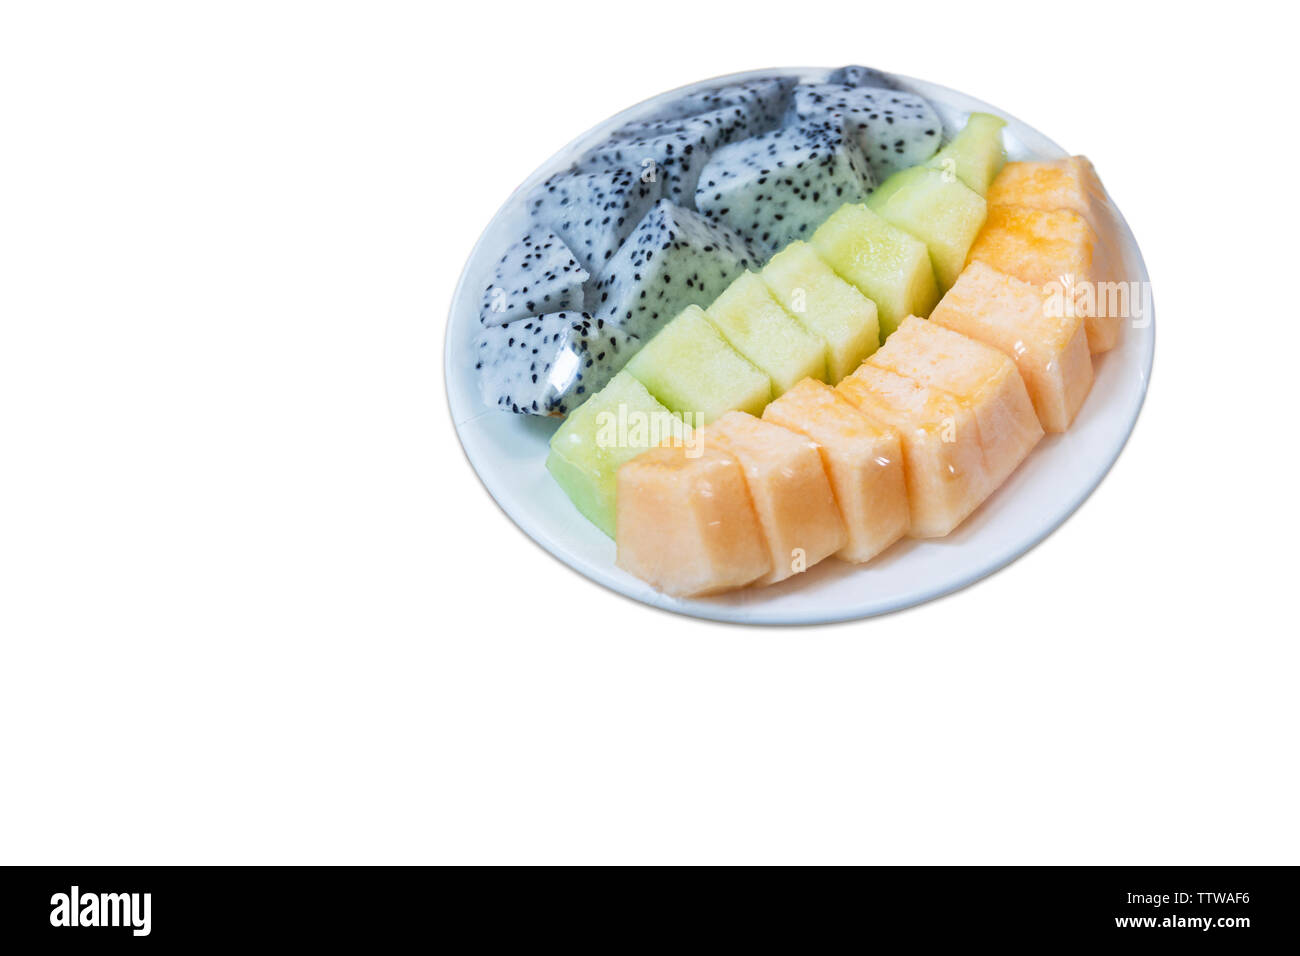 https://c8.alamy.com/comp/TTWAF6/fruits-which-are-wrapped-with-plastic-film-preservation-on-a-table-on-white-background-copy-space-TTWAF6.jpg